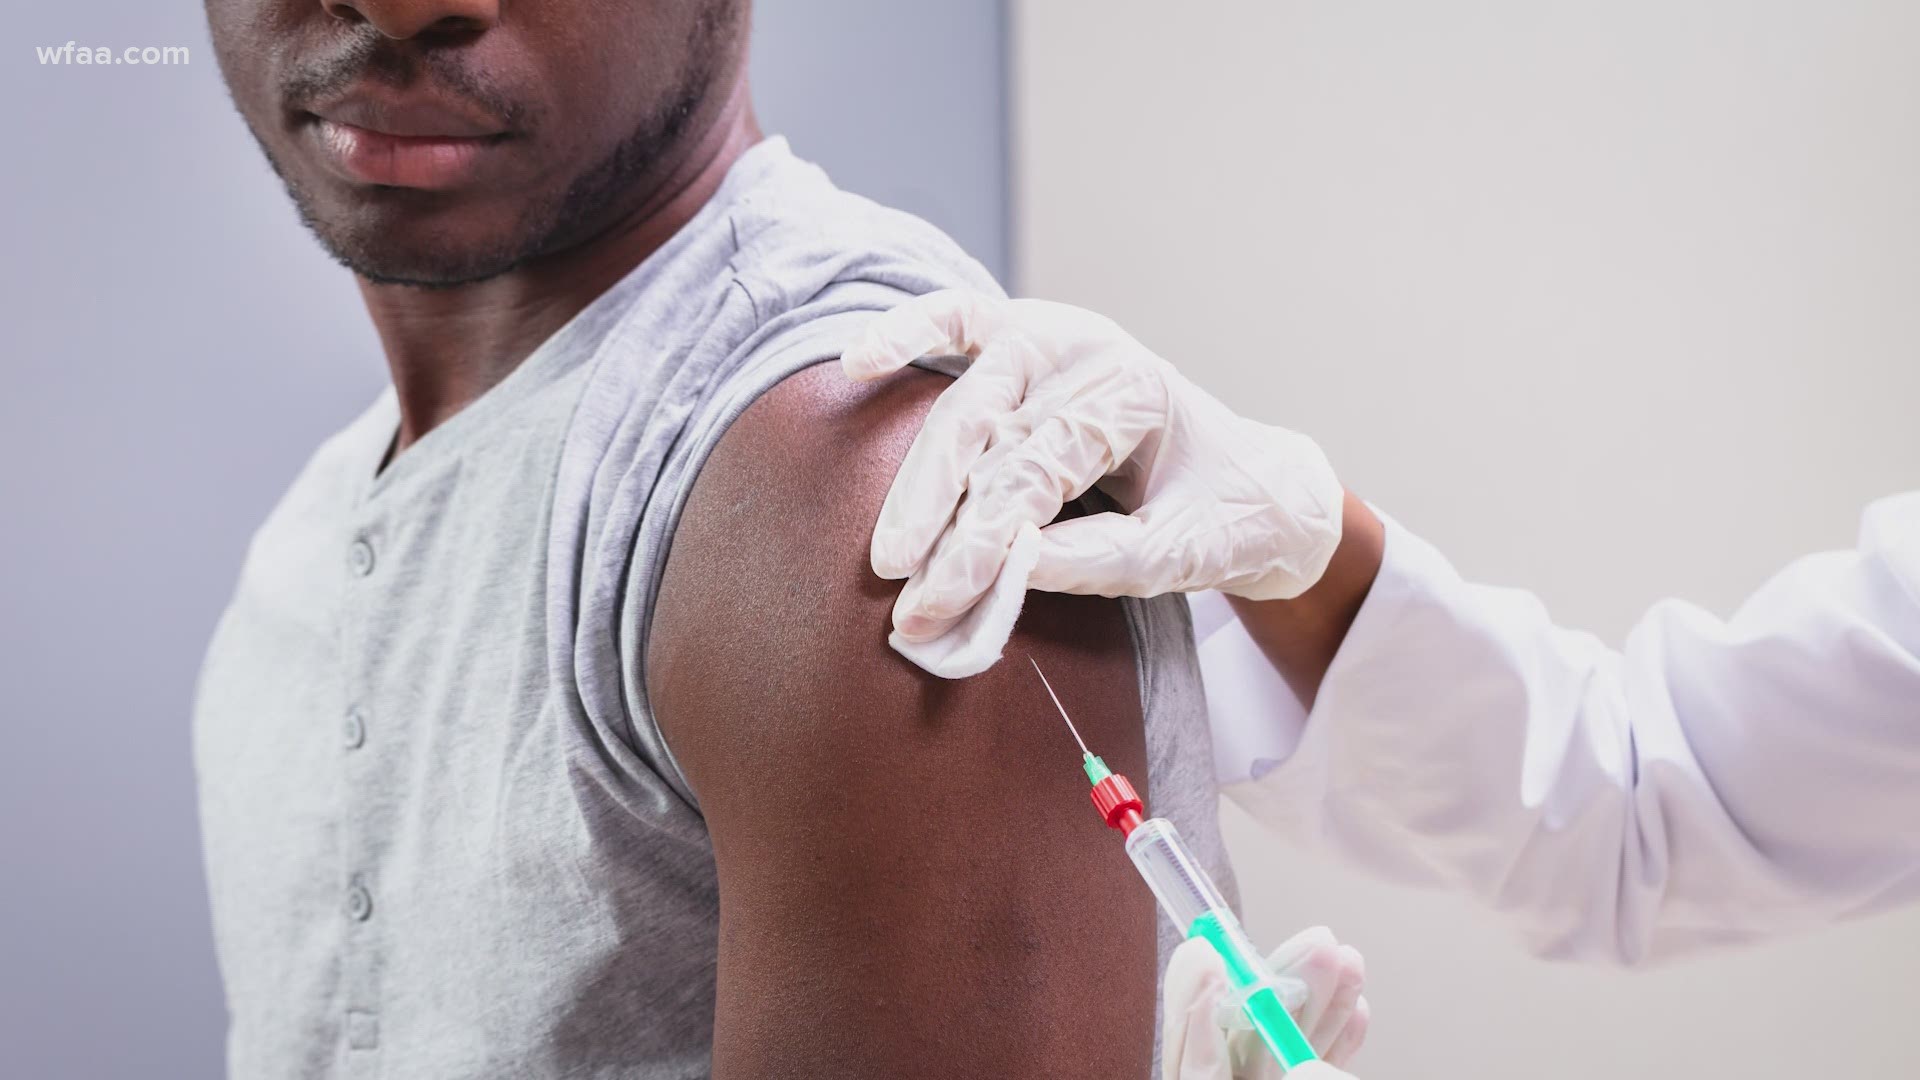 Only 2% of people 16 and older in both Dallas and Tarrant counties have been vaccinated.